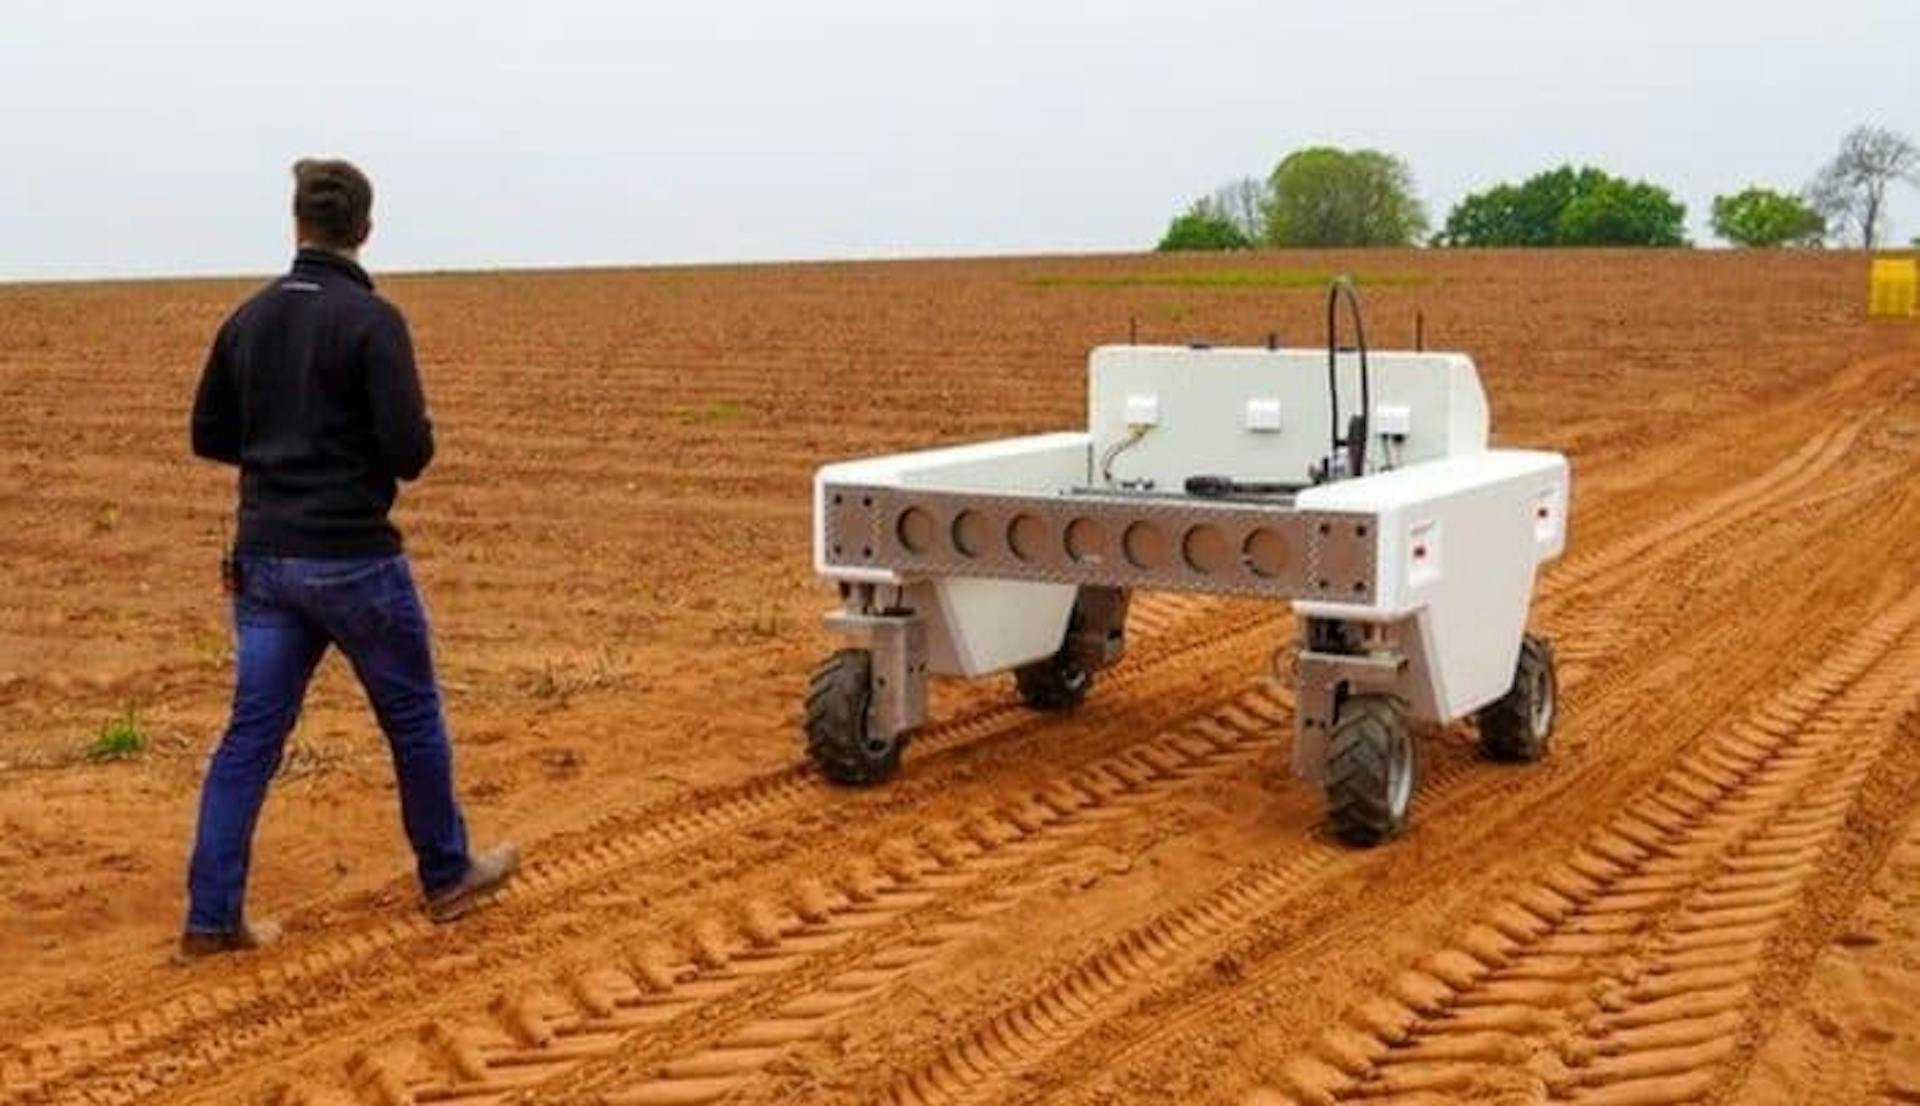 Not the tractor in question. Instead, an automated harvester for green asparagus developed by Muddy Machines